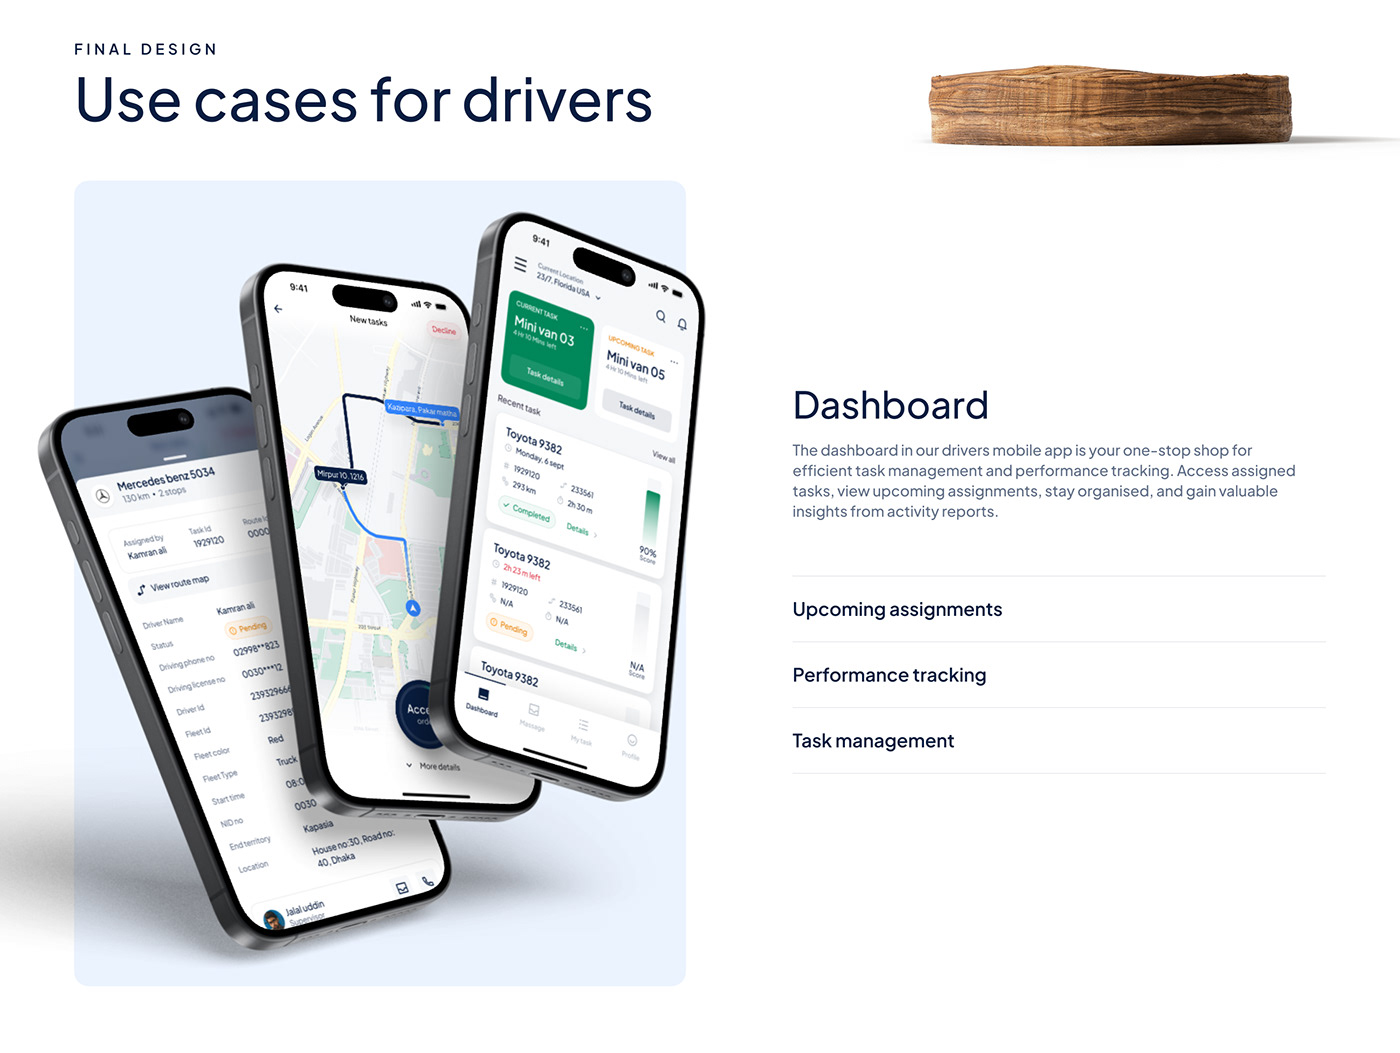 Fleet management driver use cases: upcoming assignments, performance tracking, and task management